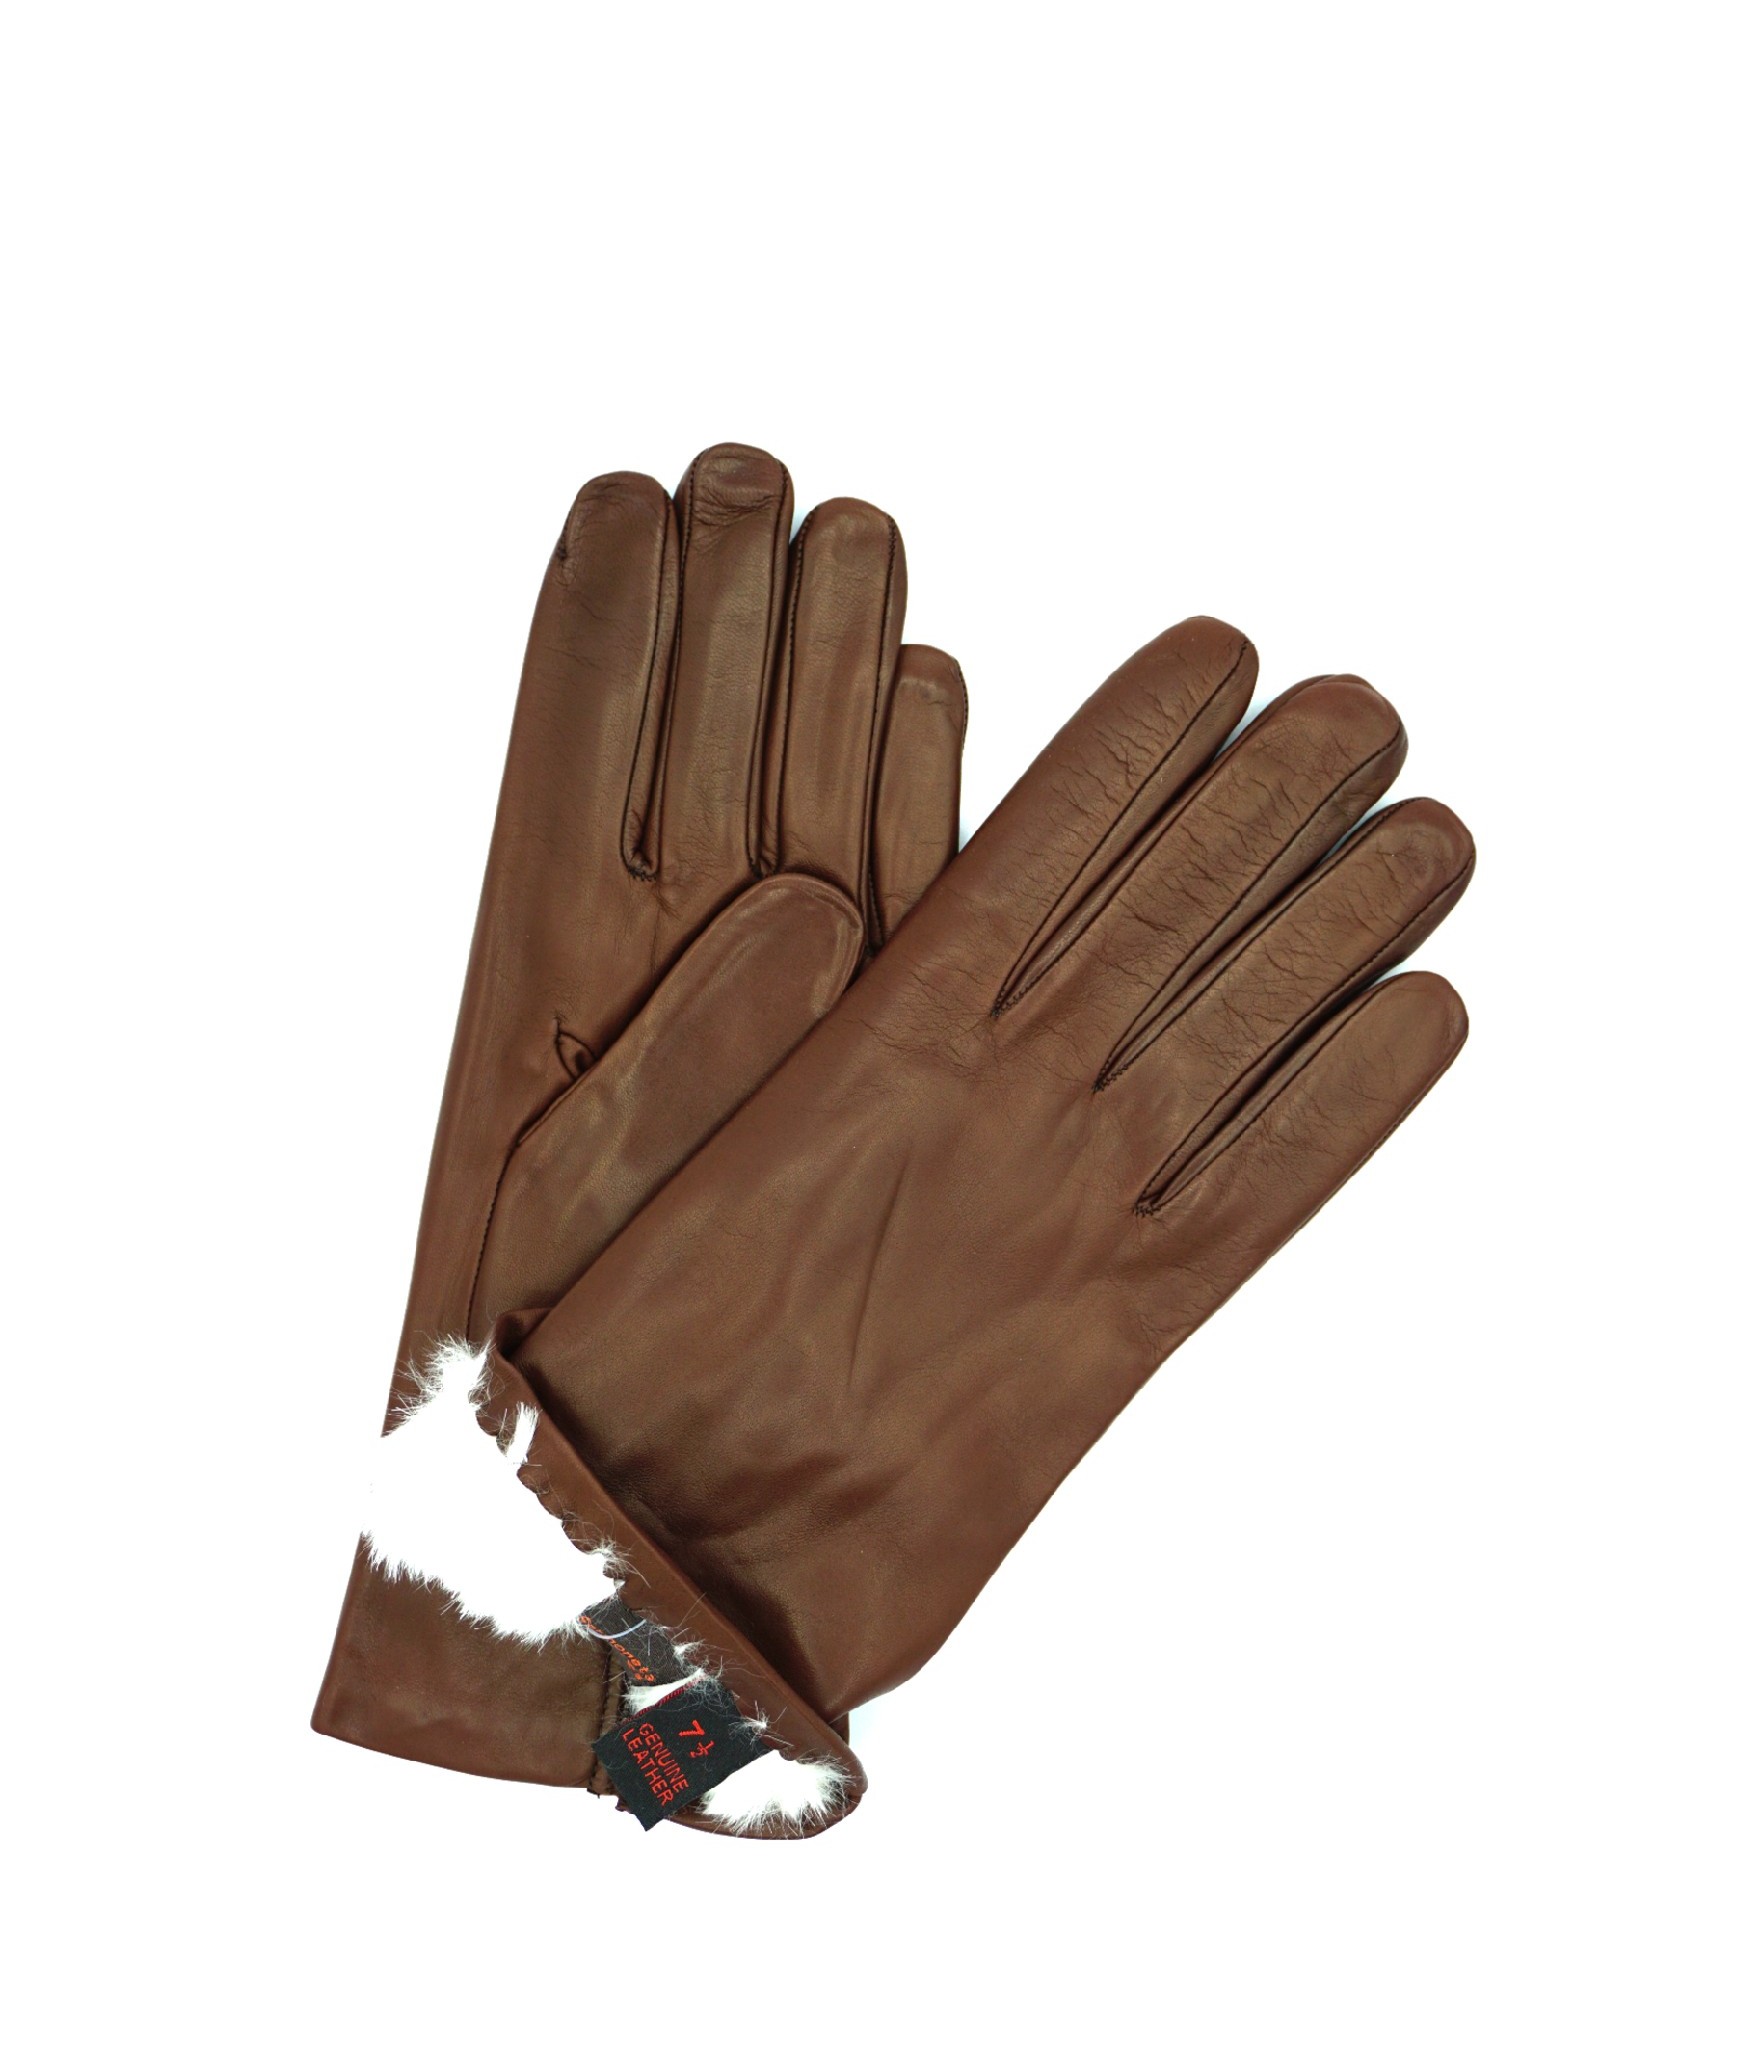 1022 Classic Leather Gloves Lined White Rabbit Mink 